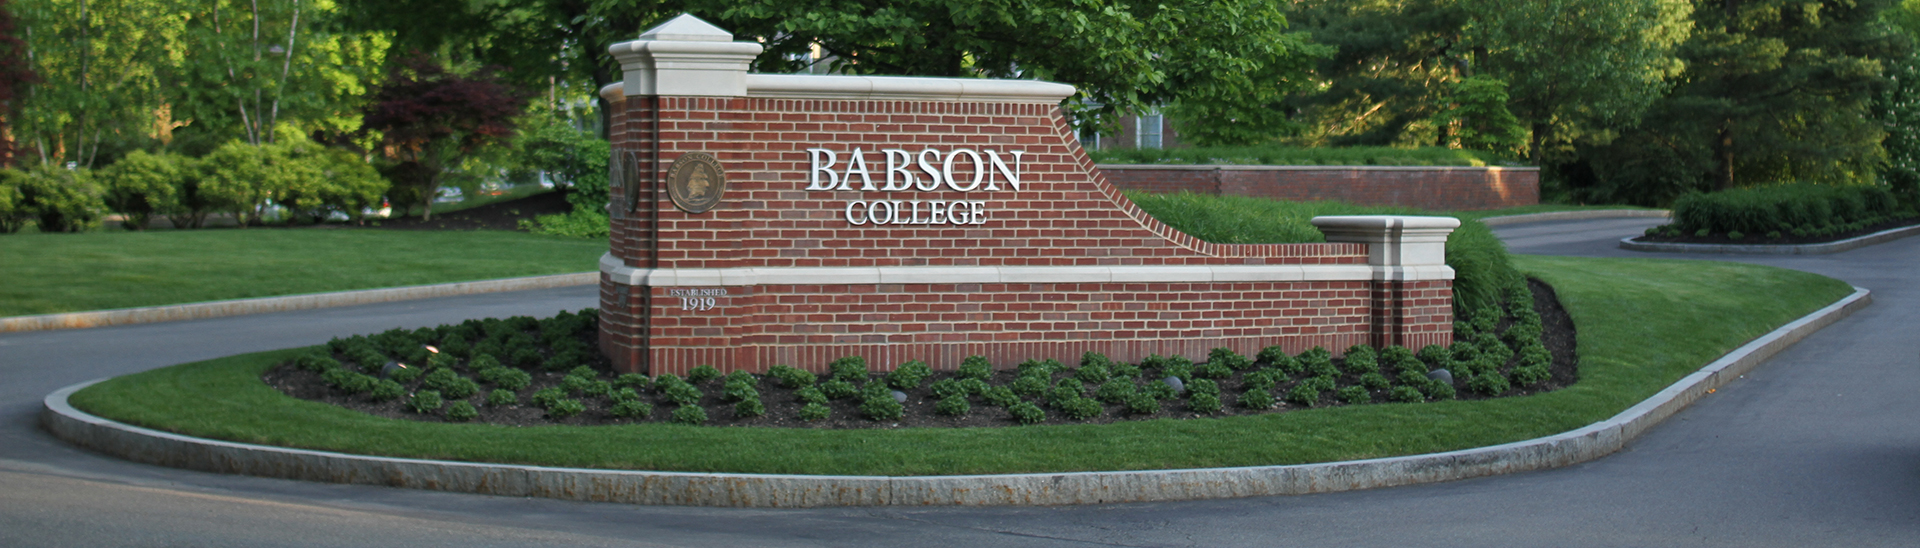 Babson College Front Gate